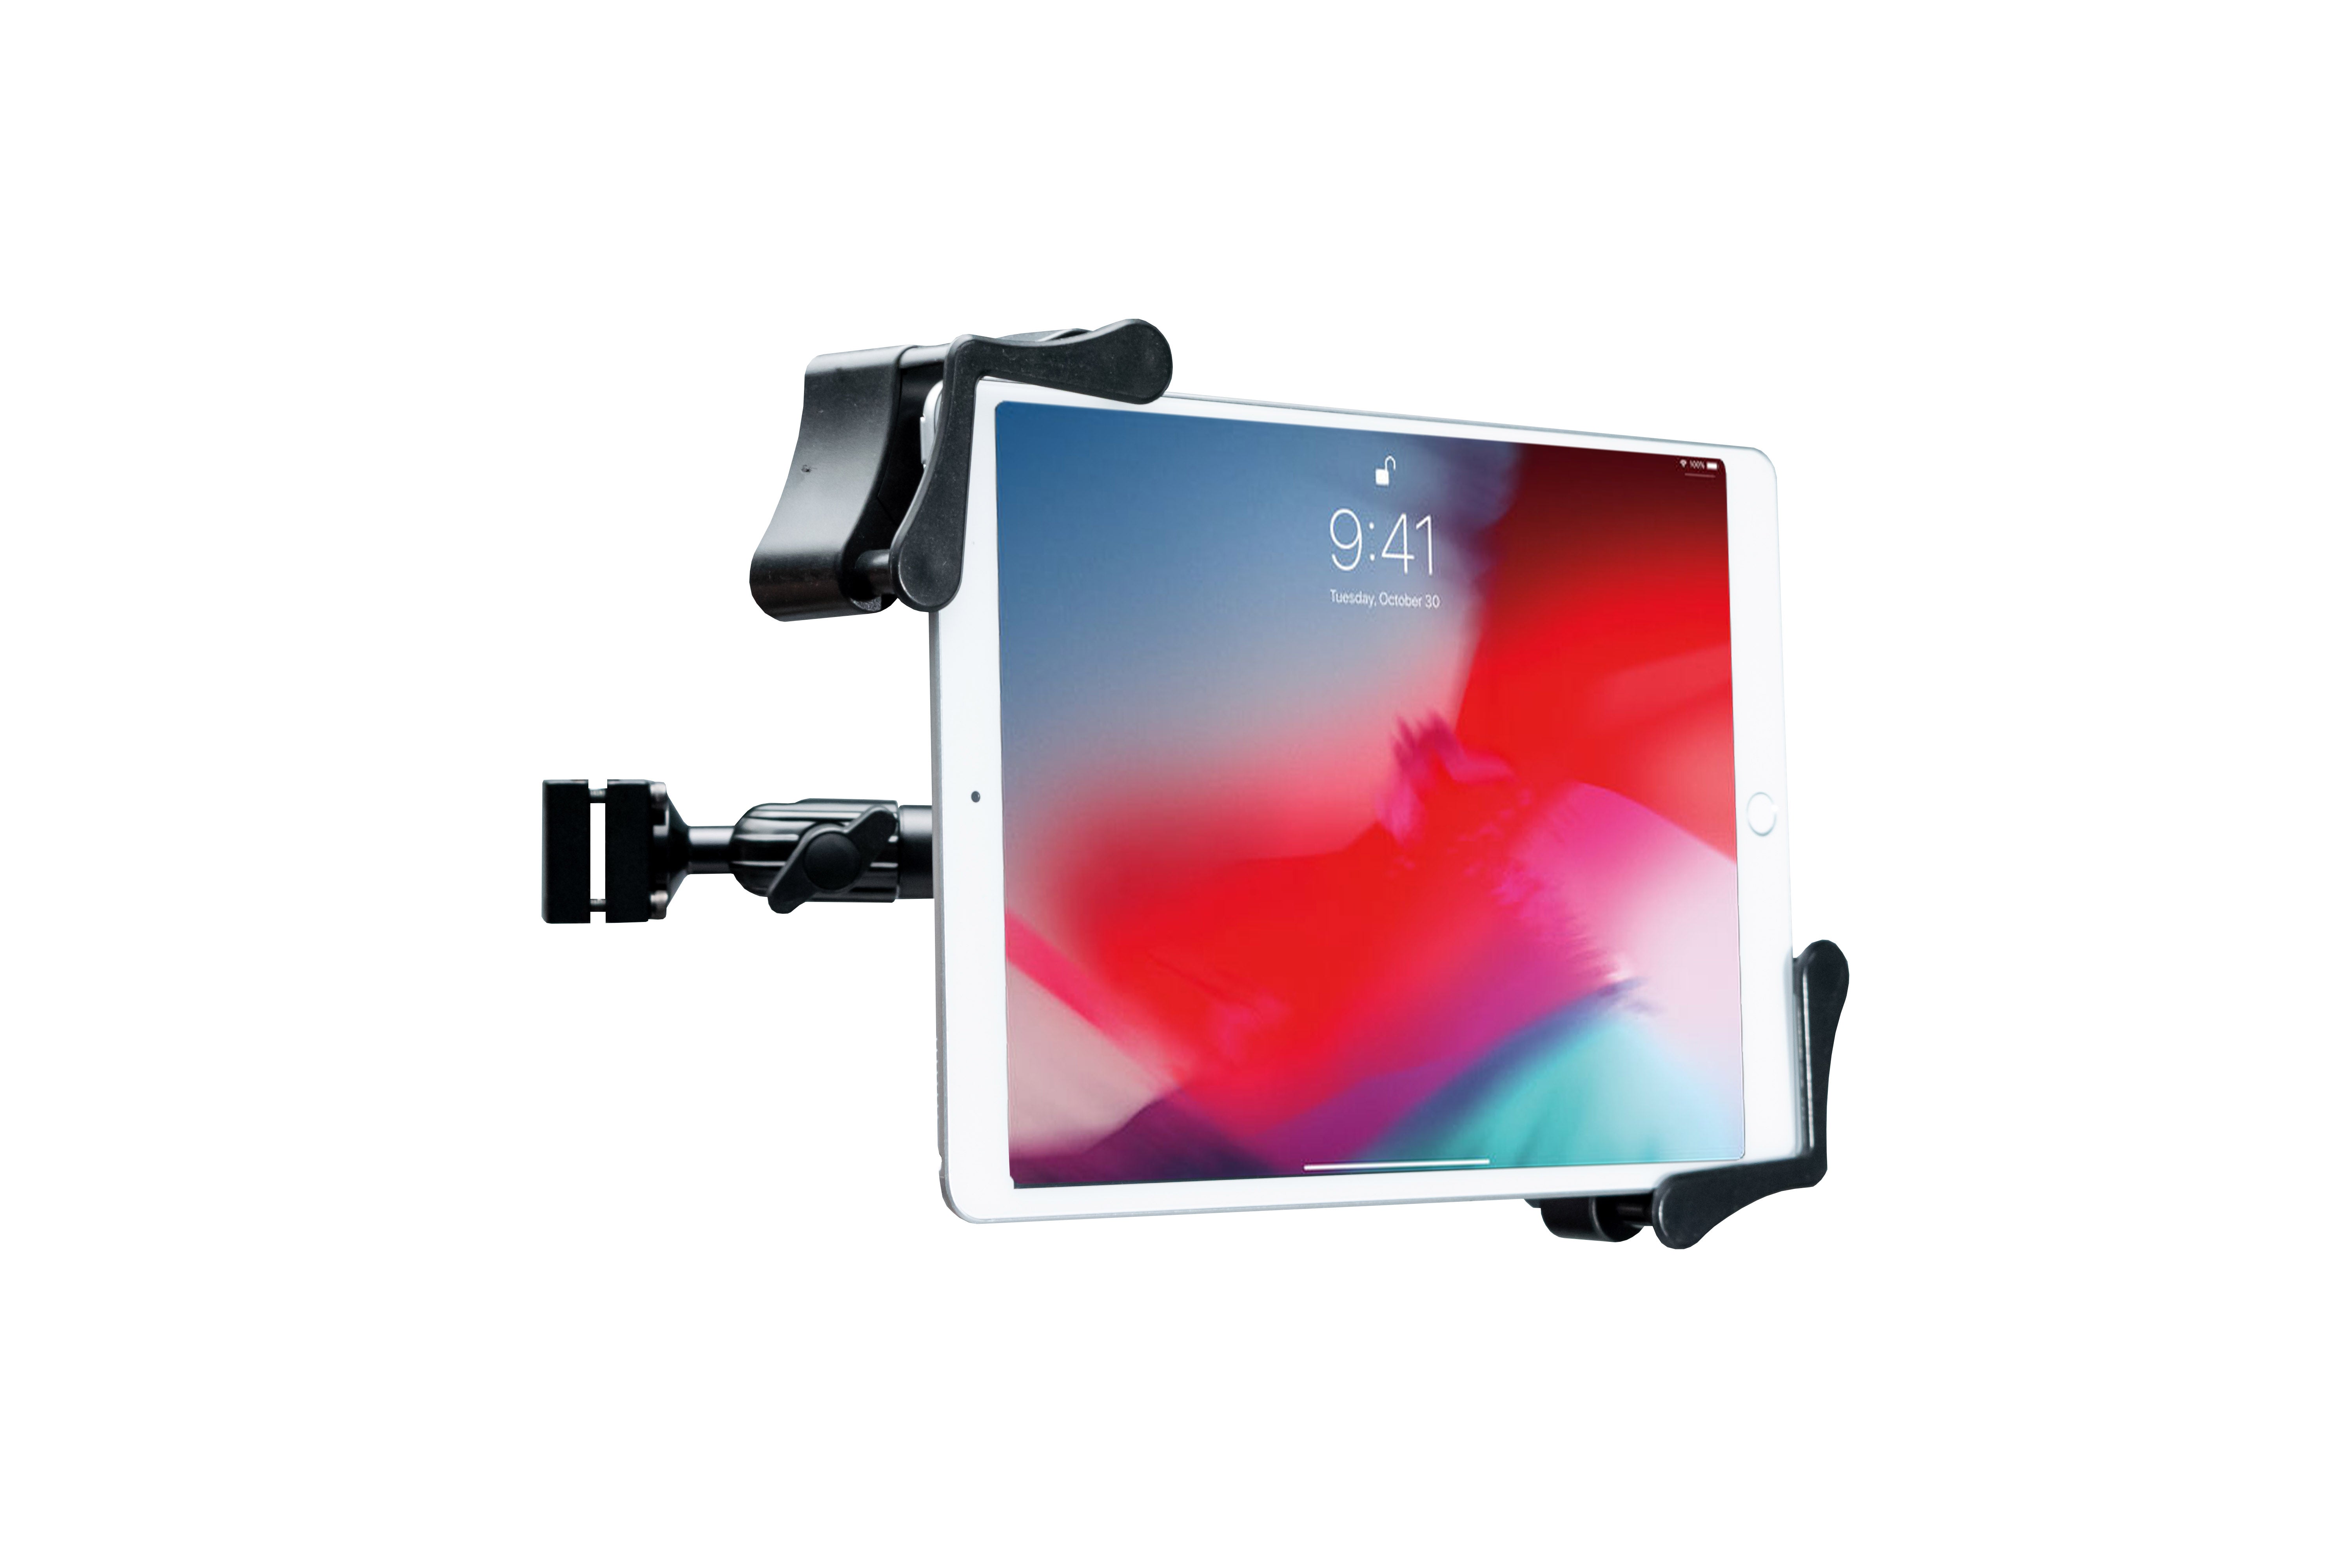 Vehicle Headrest Flex Mount for 7-14 Inch Tablets including iPad Air & iPad Pro 11" - M2/M4 (2024), iPad Air and iPad Pro 13" - M2/M4 (2024) and more